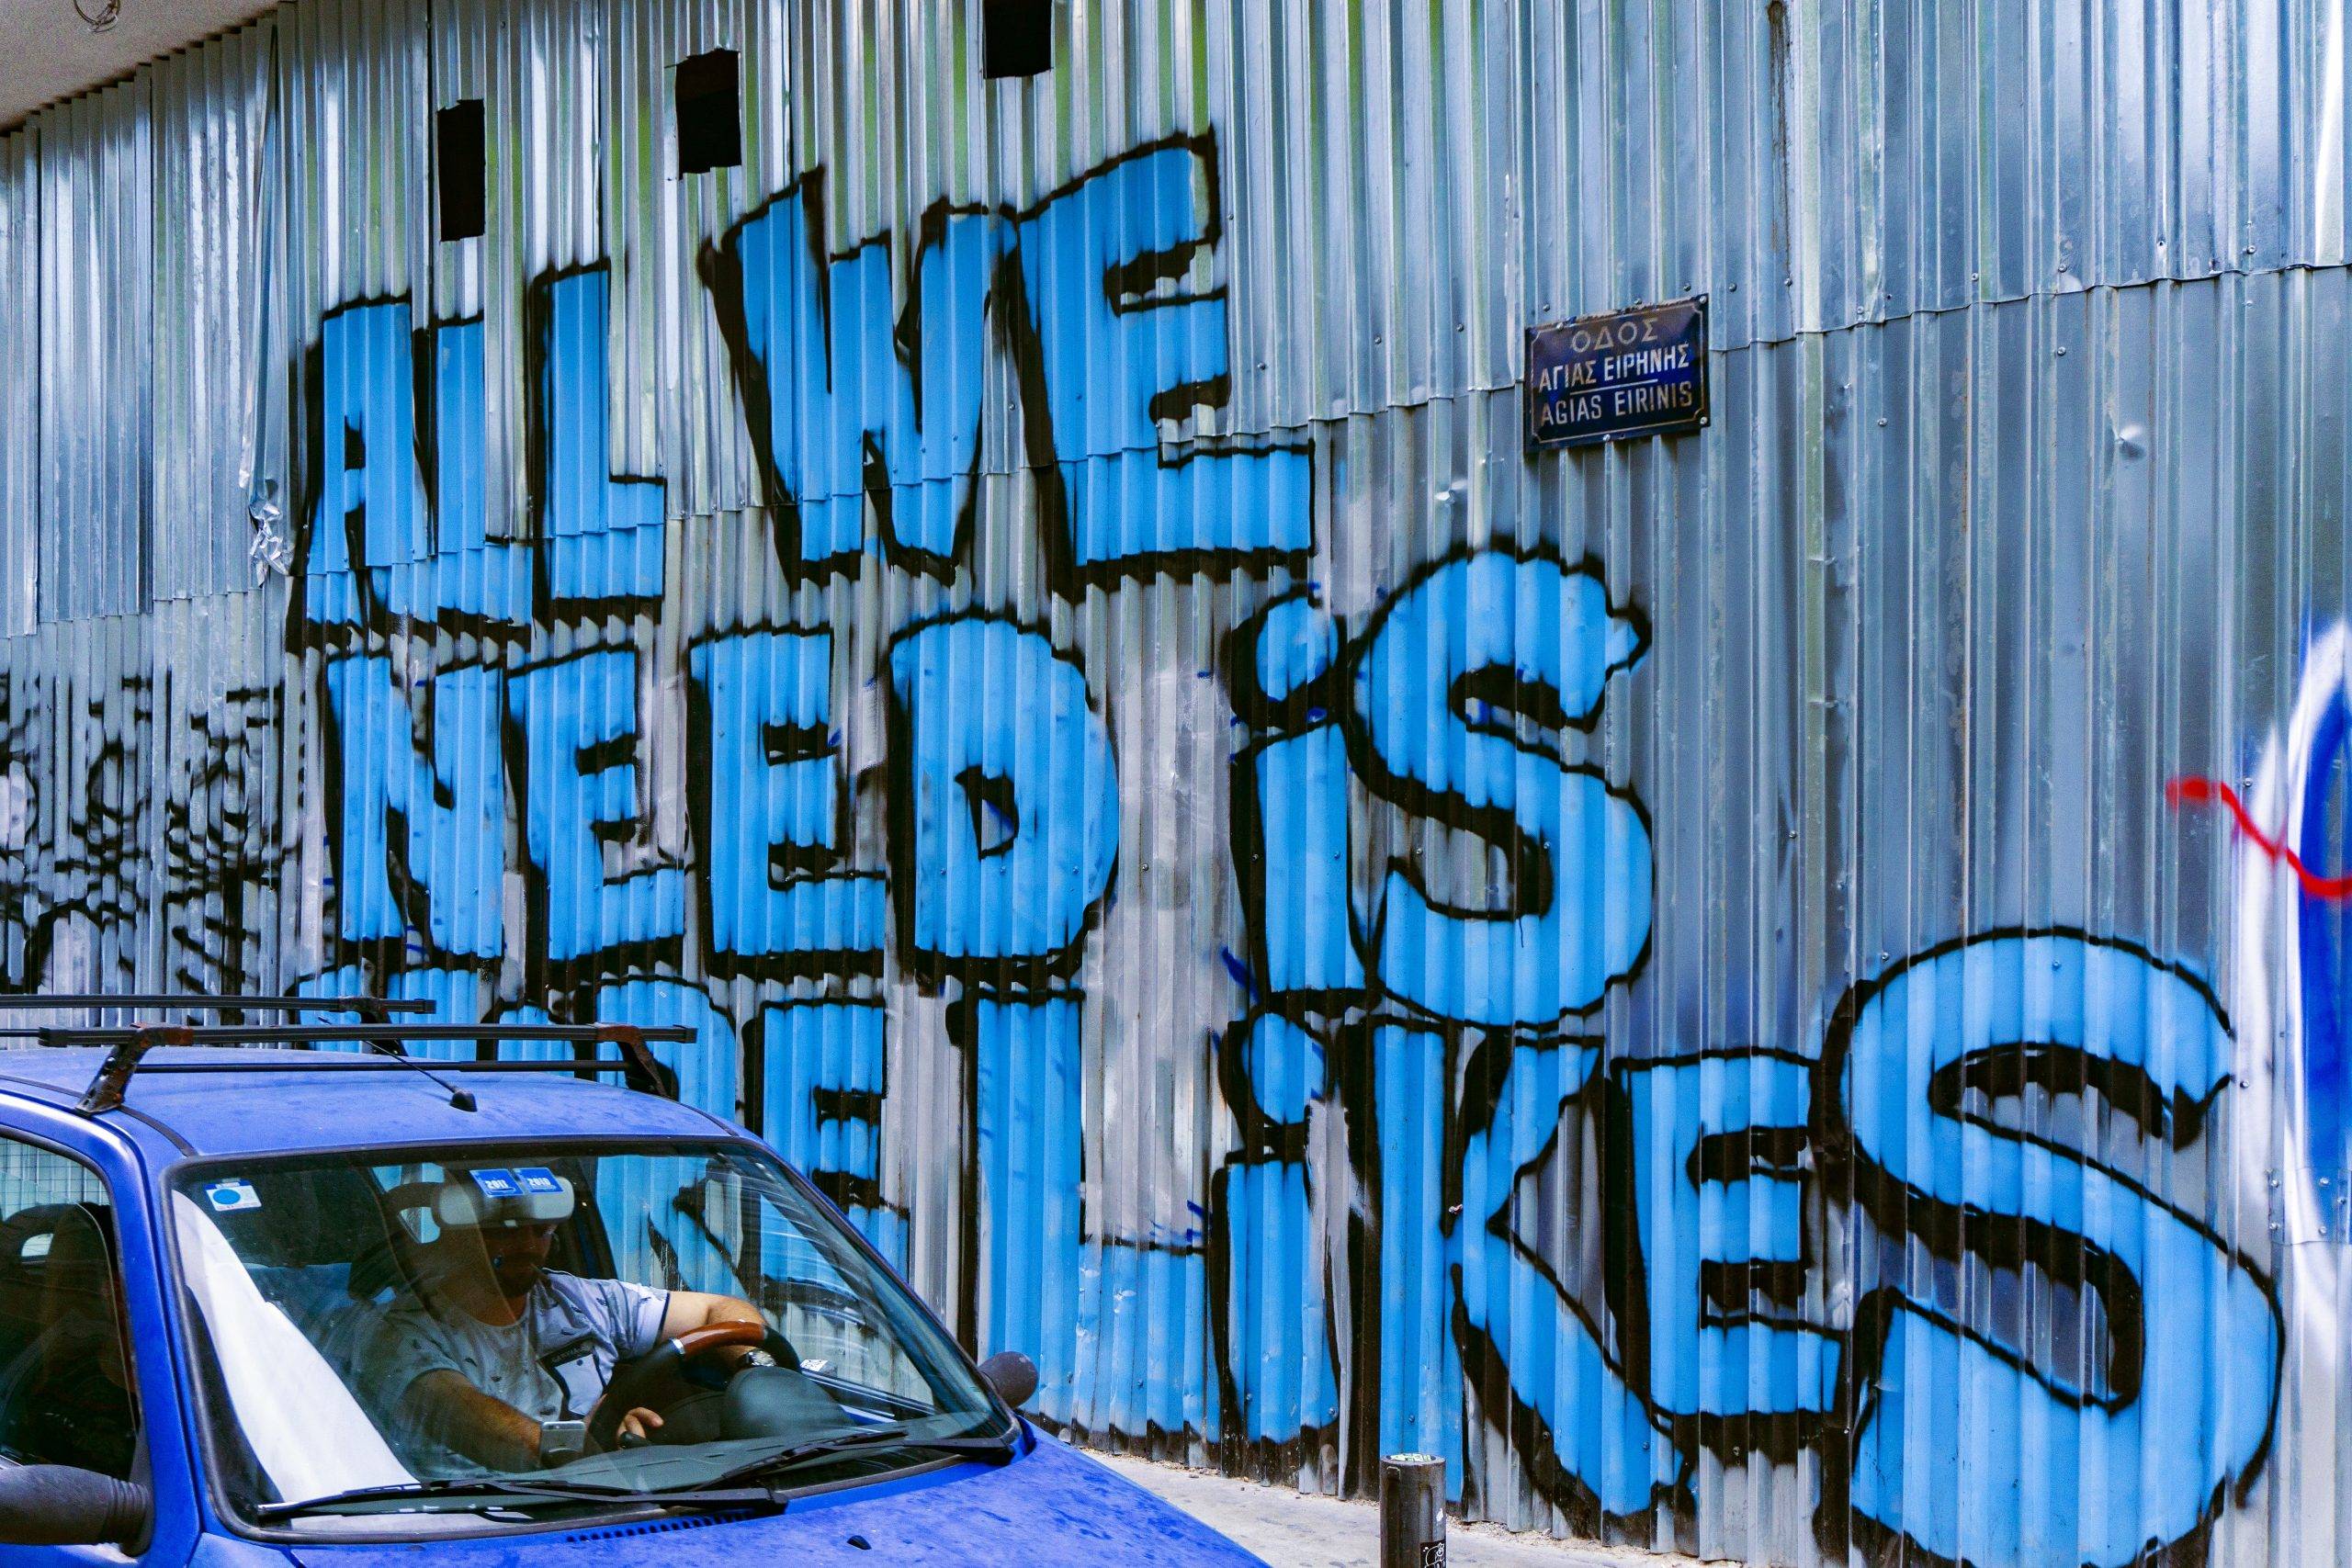 6 ways to adopt a minimalist approach to social media - graffiti of likes in Madrid